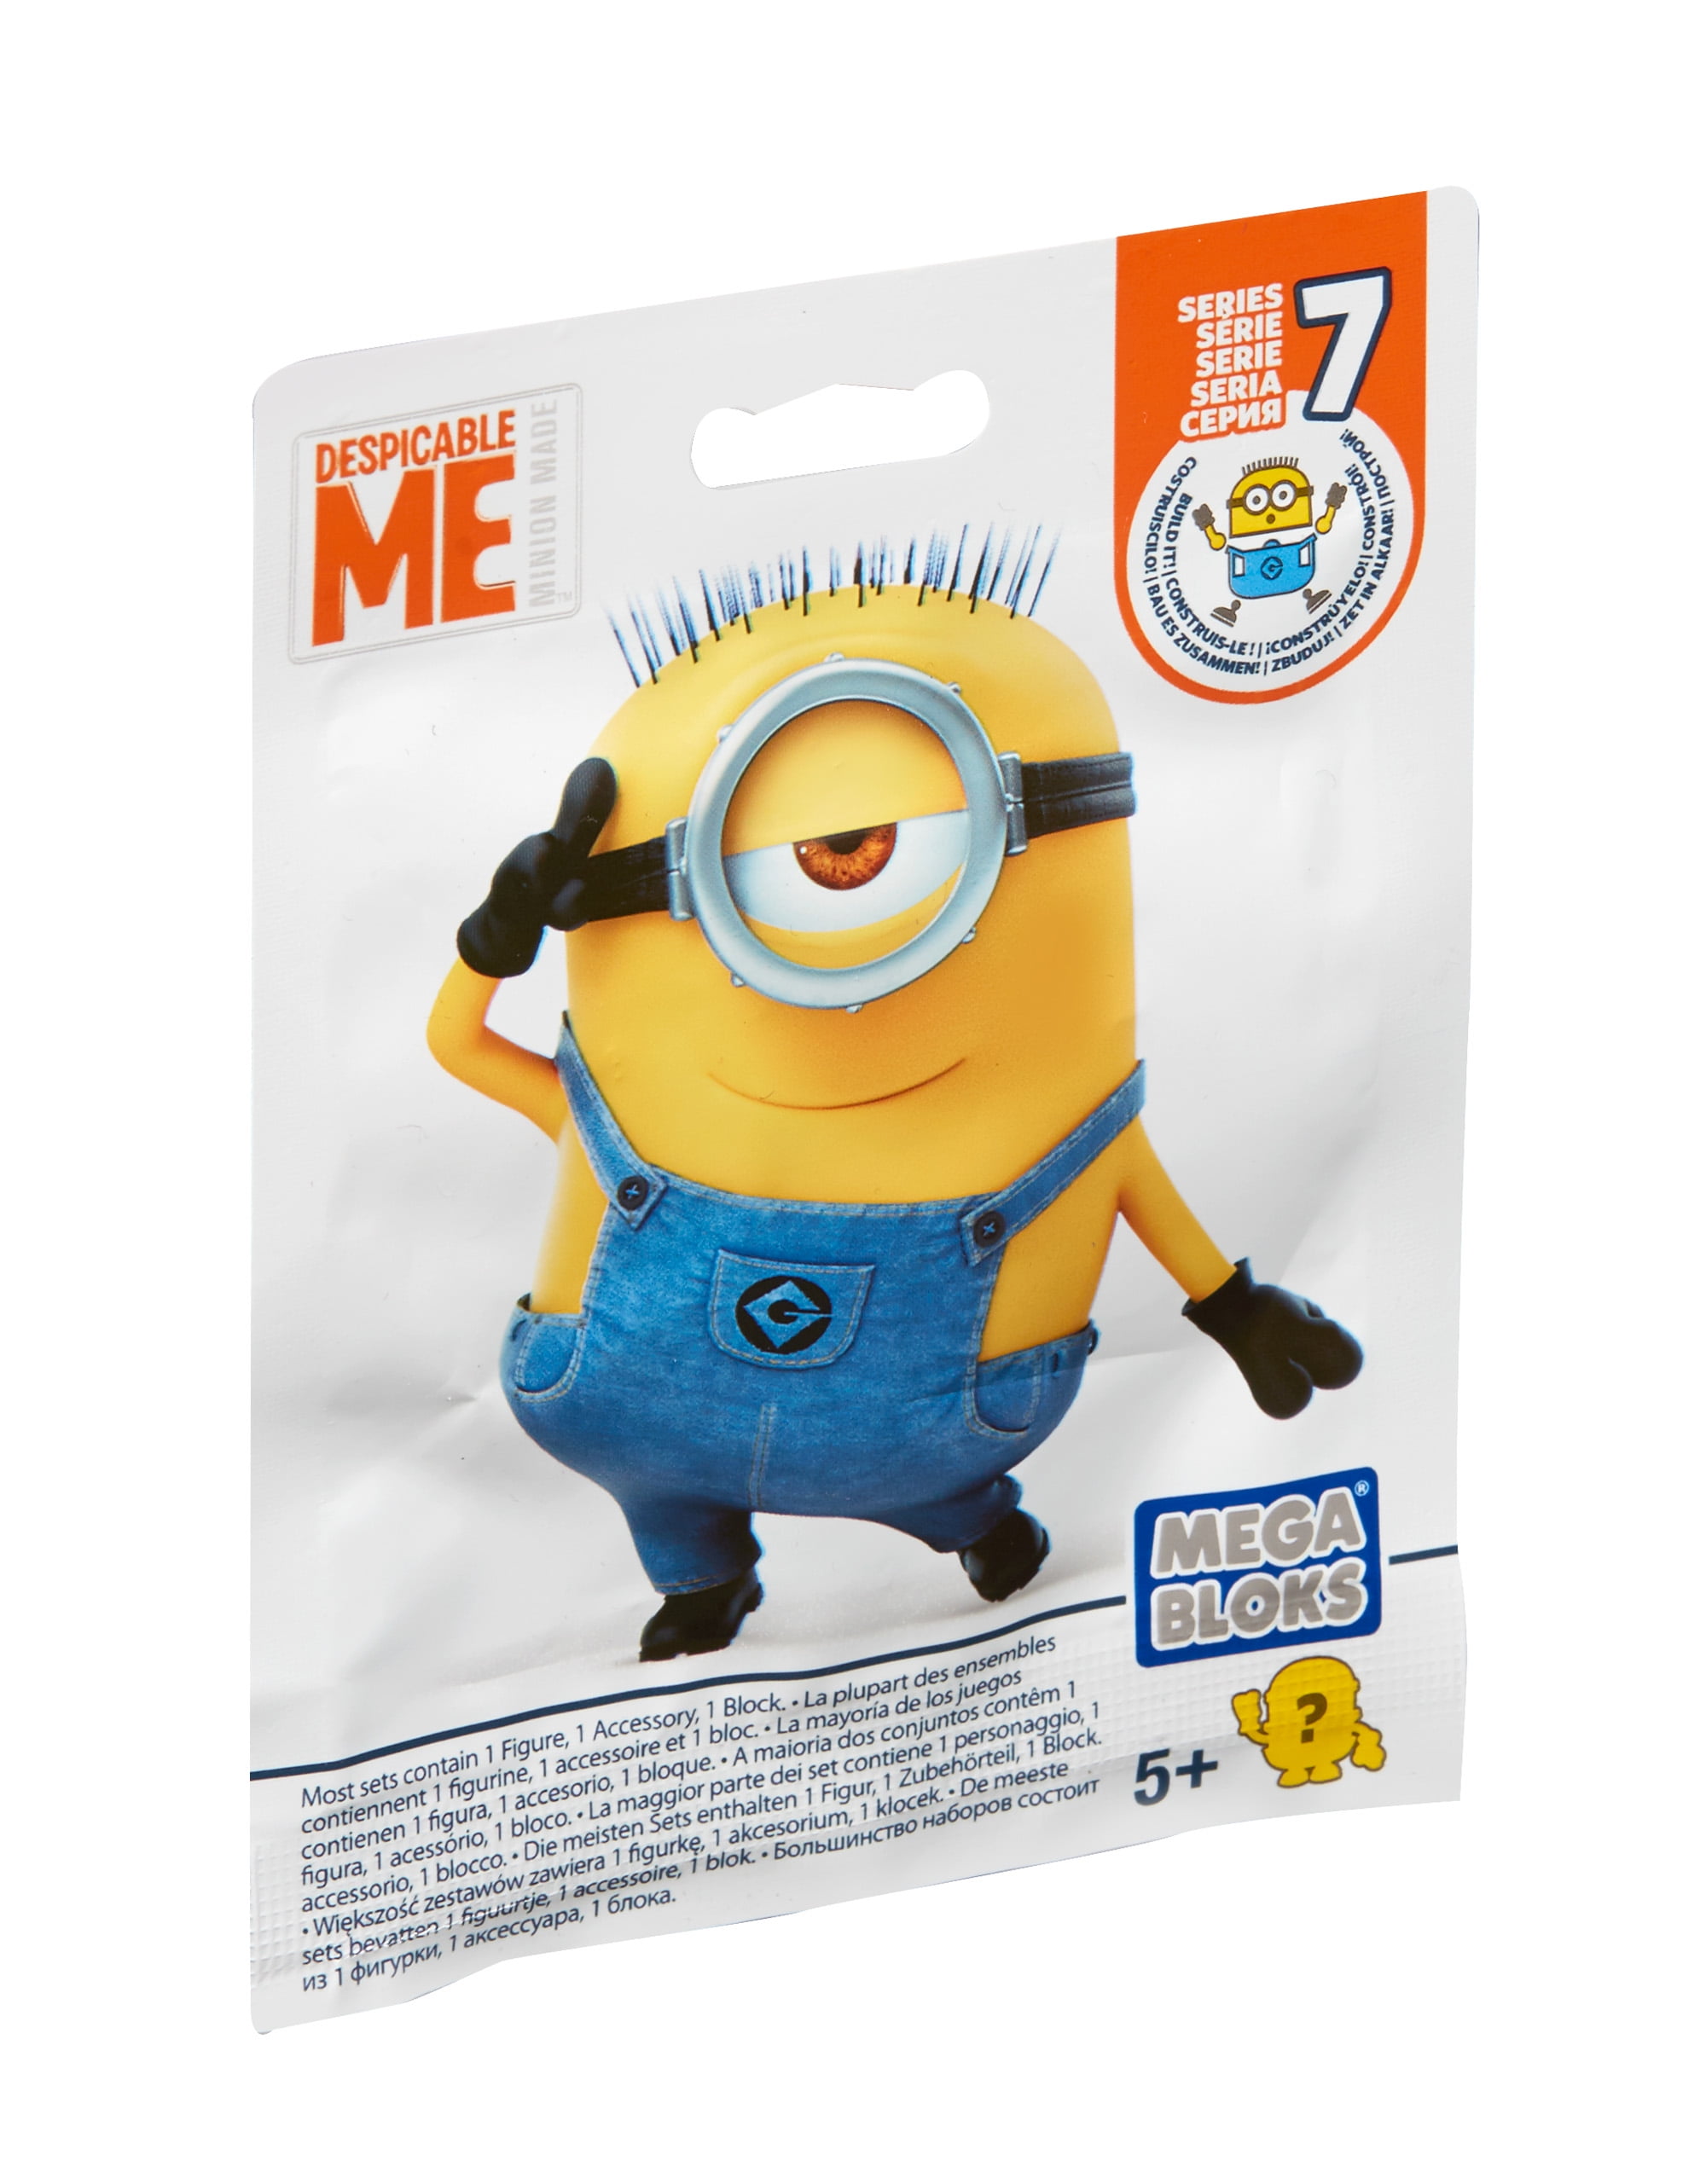 6x MEGA Construx Despicable Me Minions Series 12 Blind Bags Mystery for sale online 